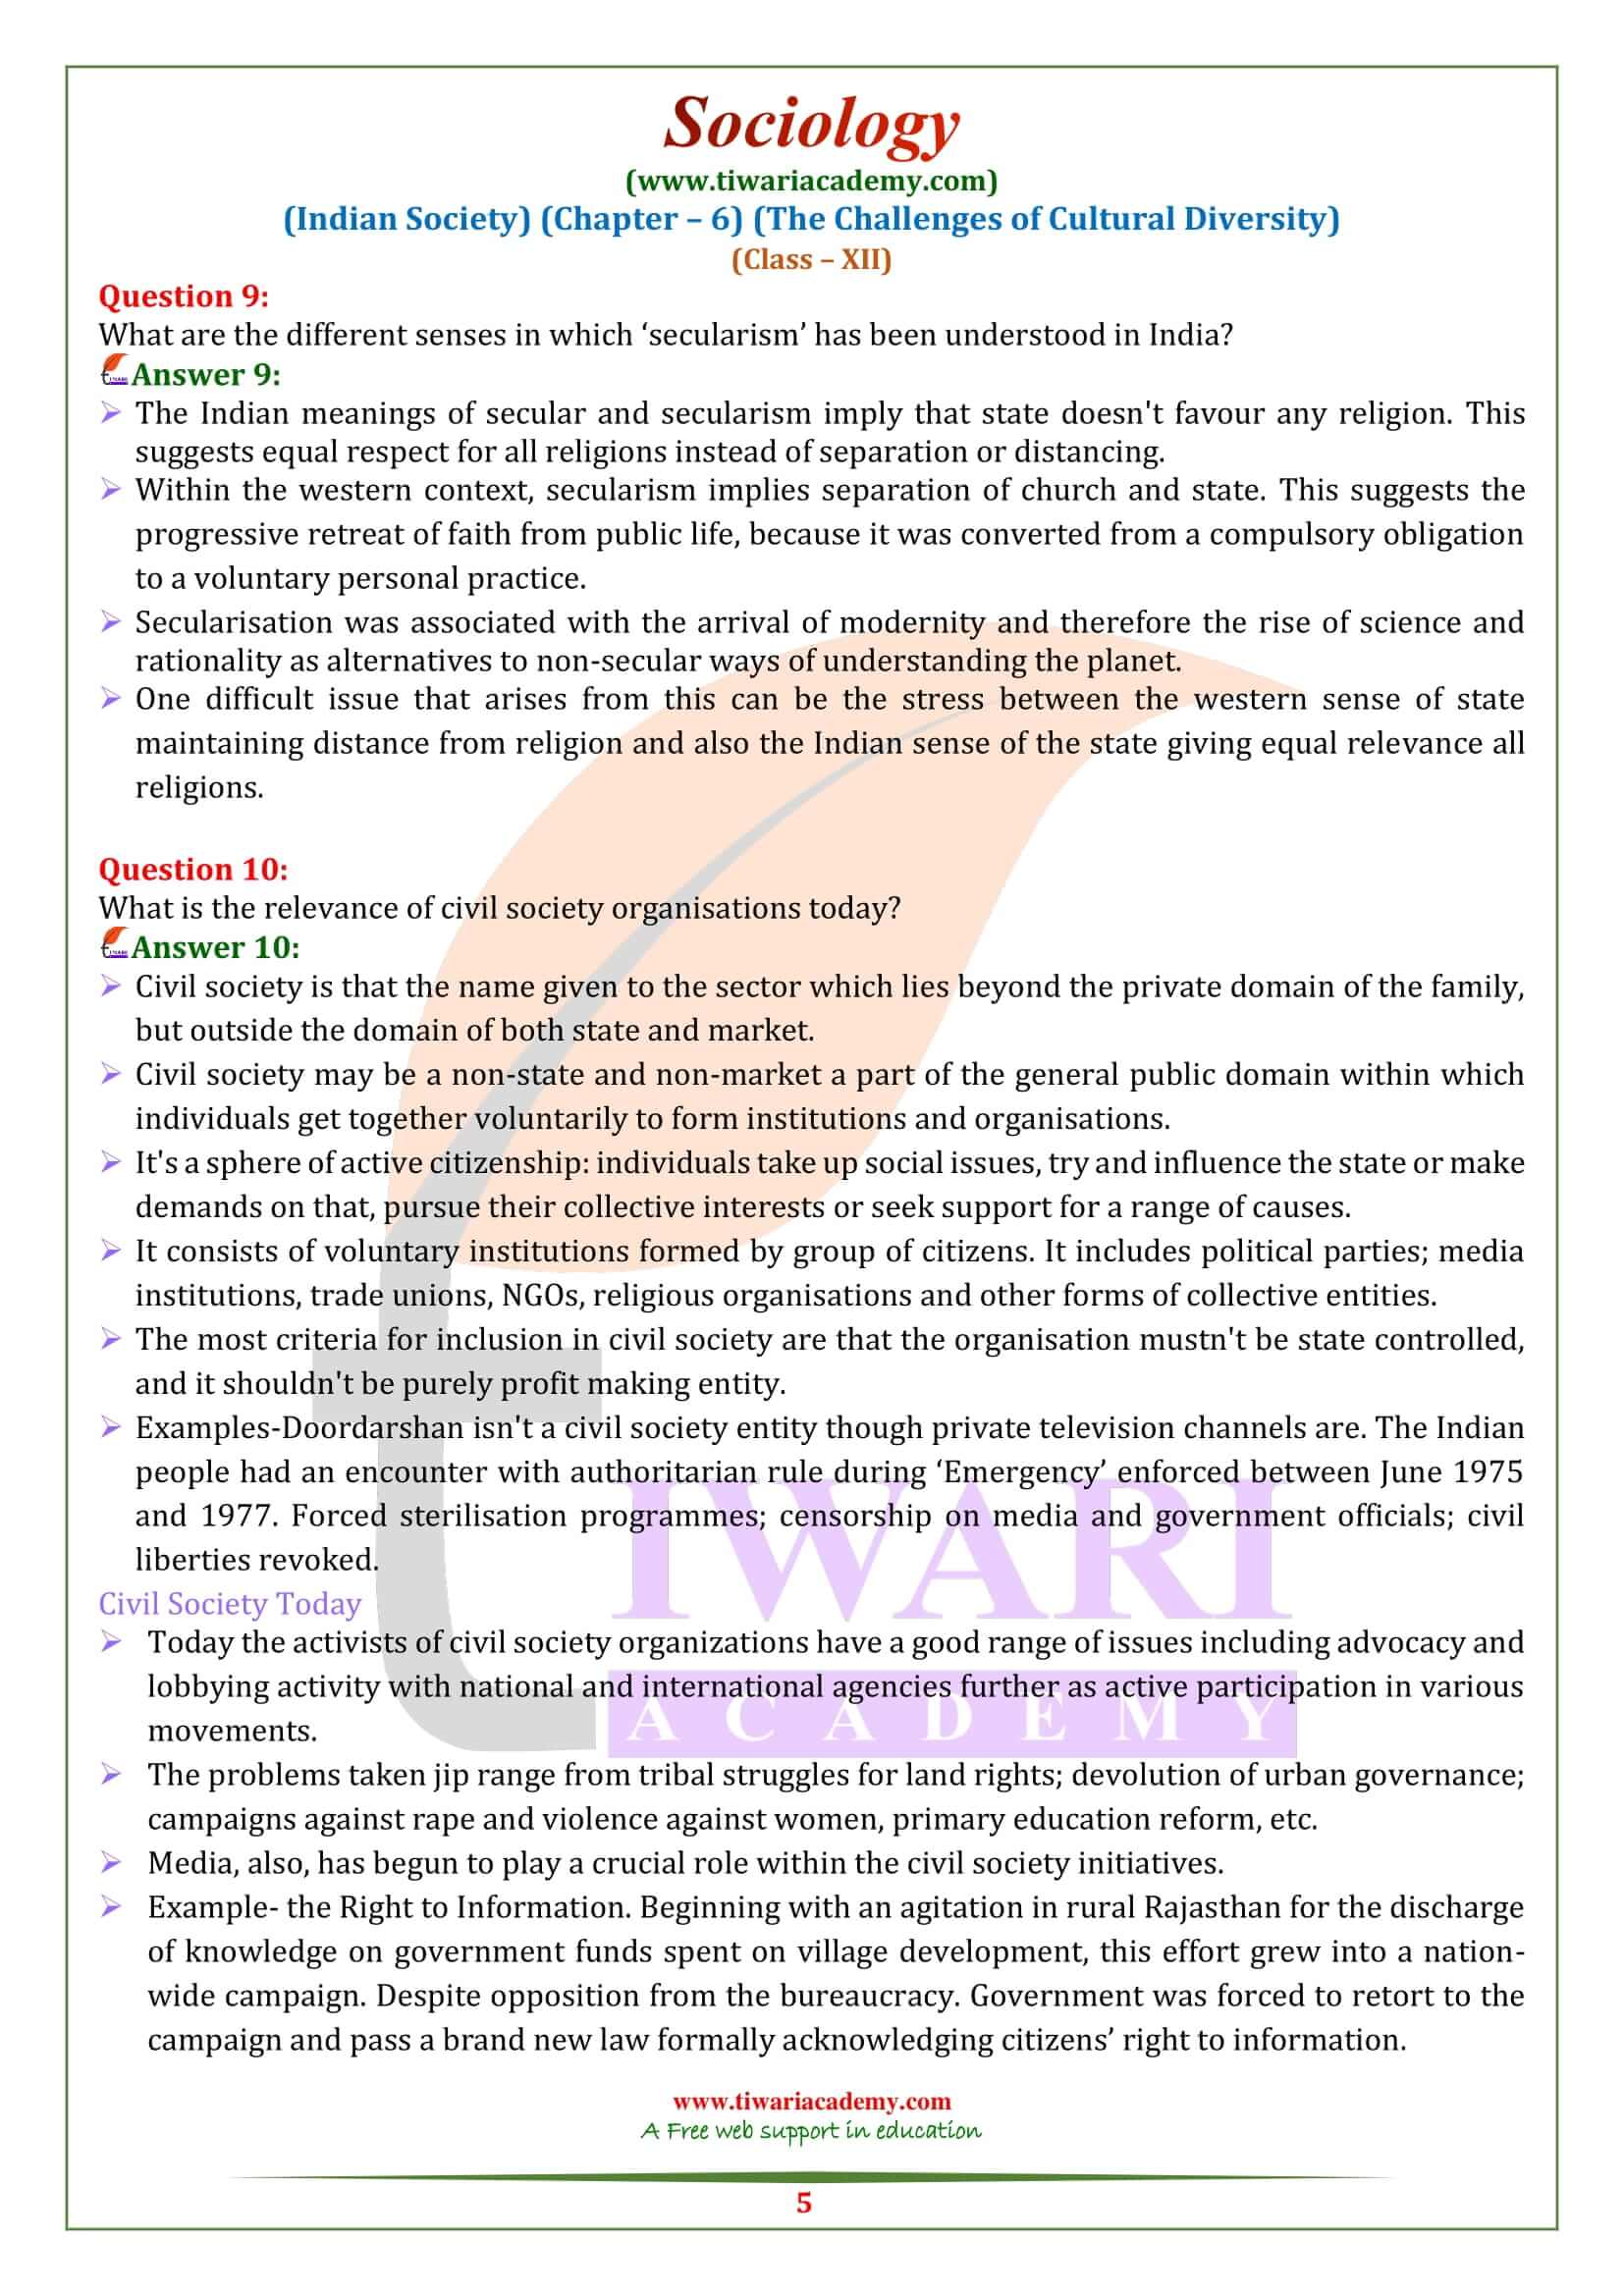 NCERT Solutions for Class 12 Sociology Chapter 6 exercises answers